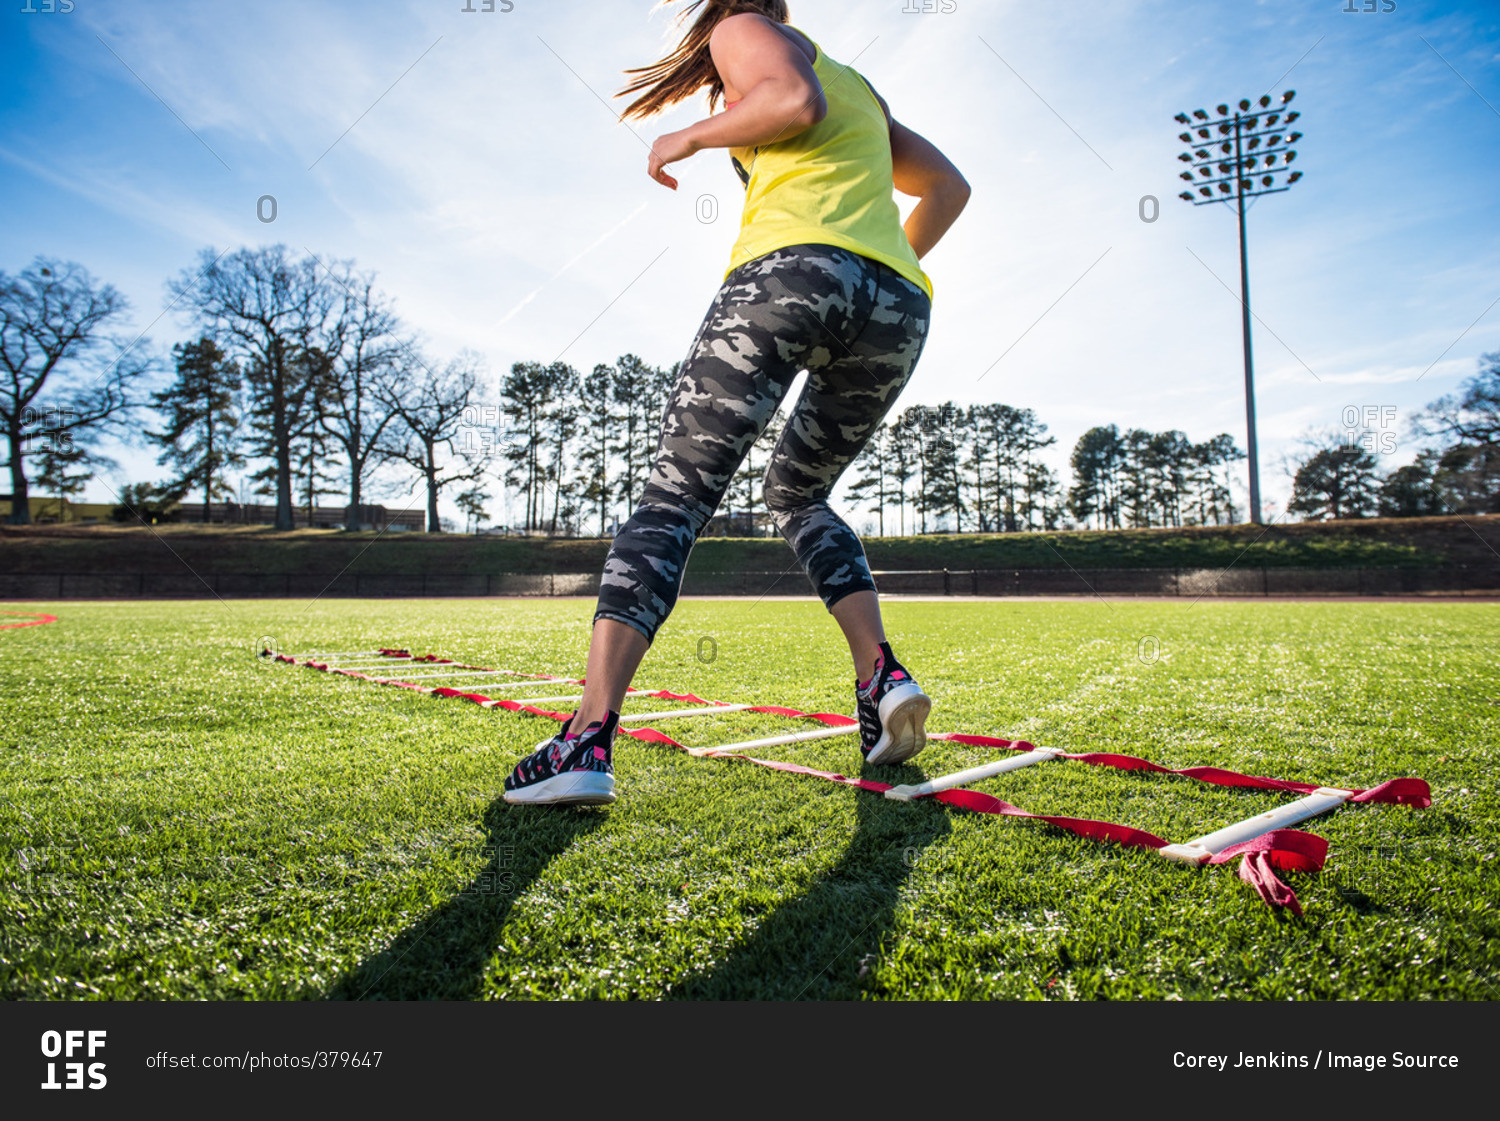 Female athlete training with agility ladder on sports field